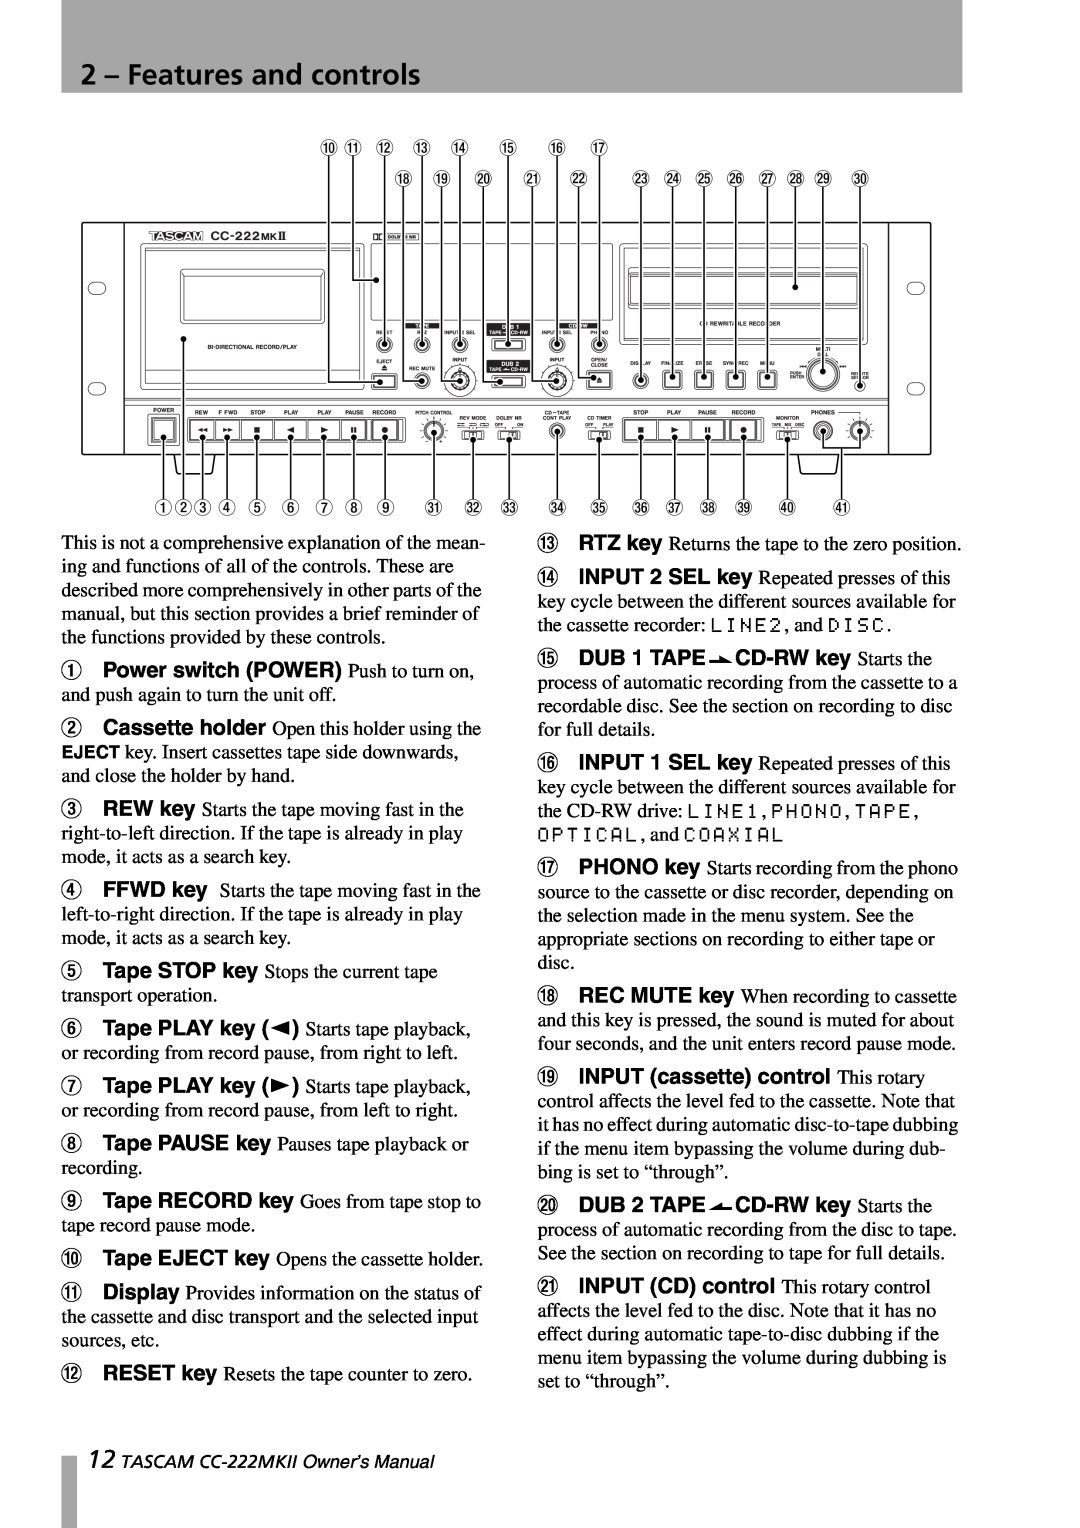 Tascam CC-222MKII owner manual Features and controls 